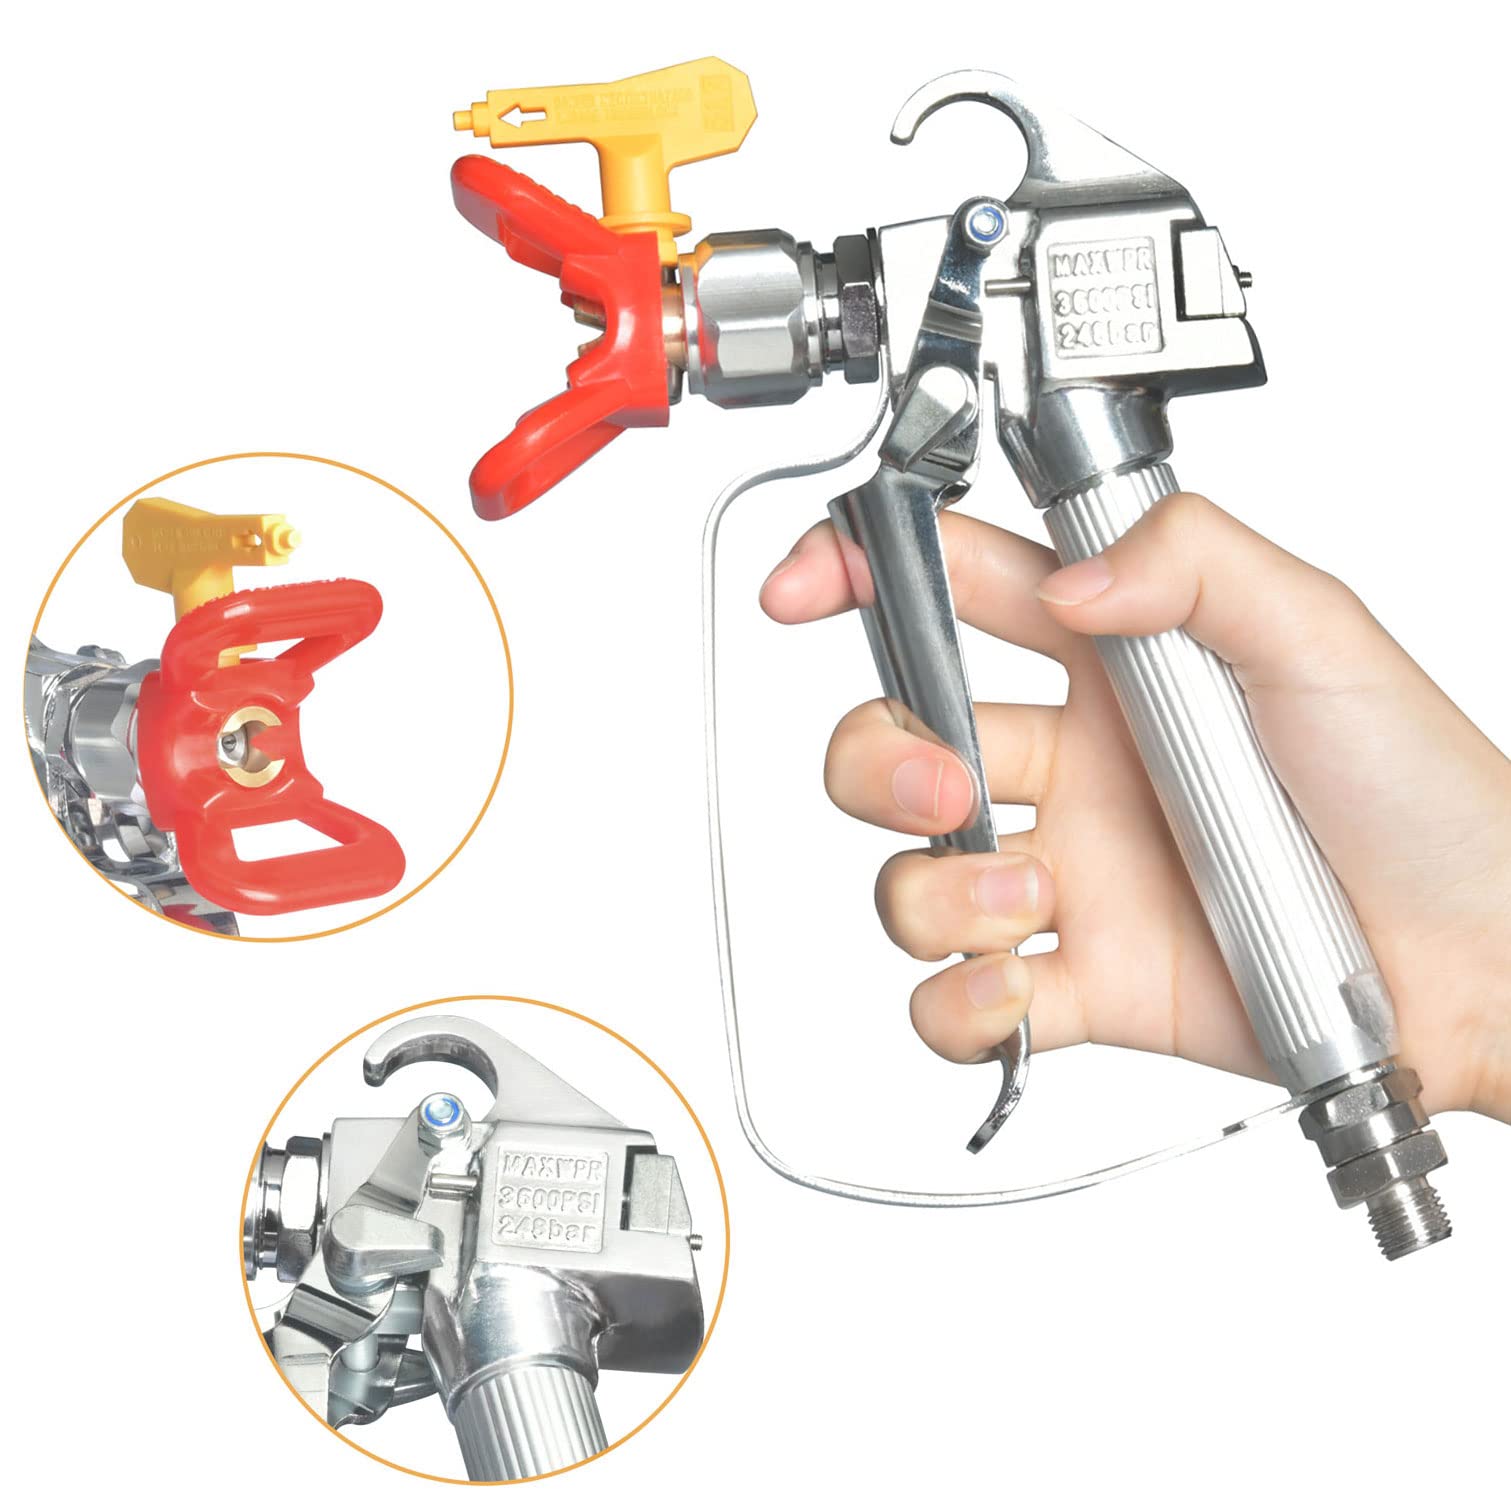 JWGJW 120028 Airless Paint Spray Gun,High Pressure 3600 PSI /517 Tip Swivel Joint with 10 Inch Extension Pole